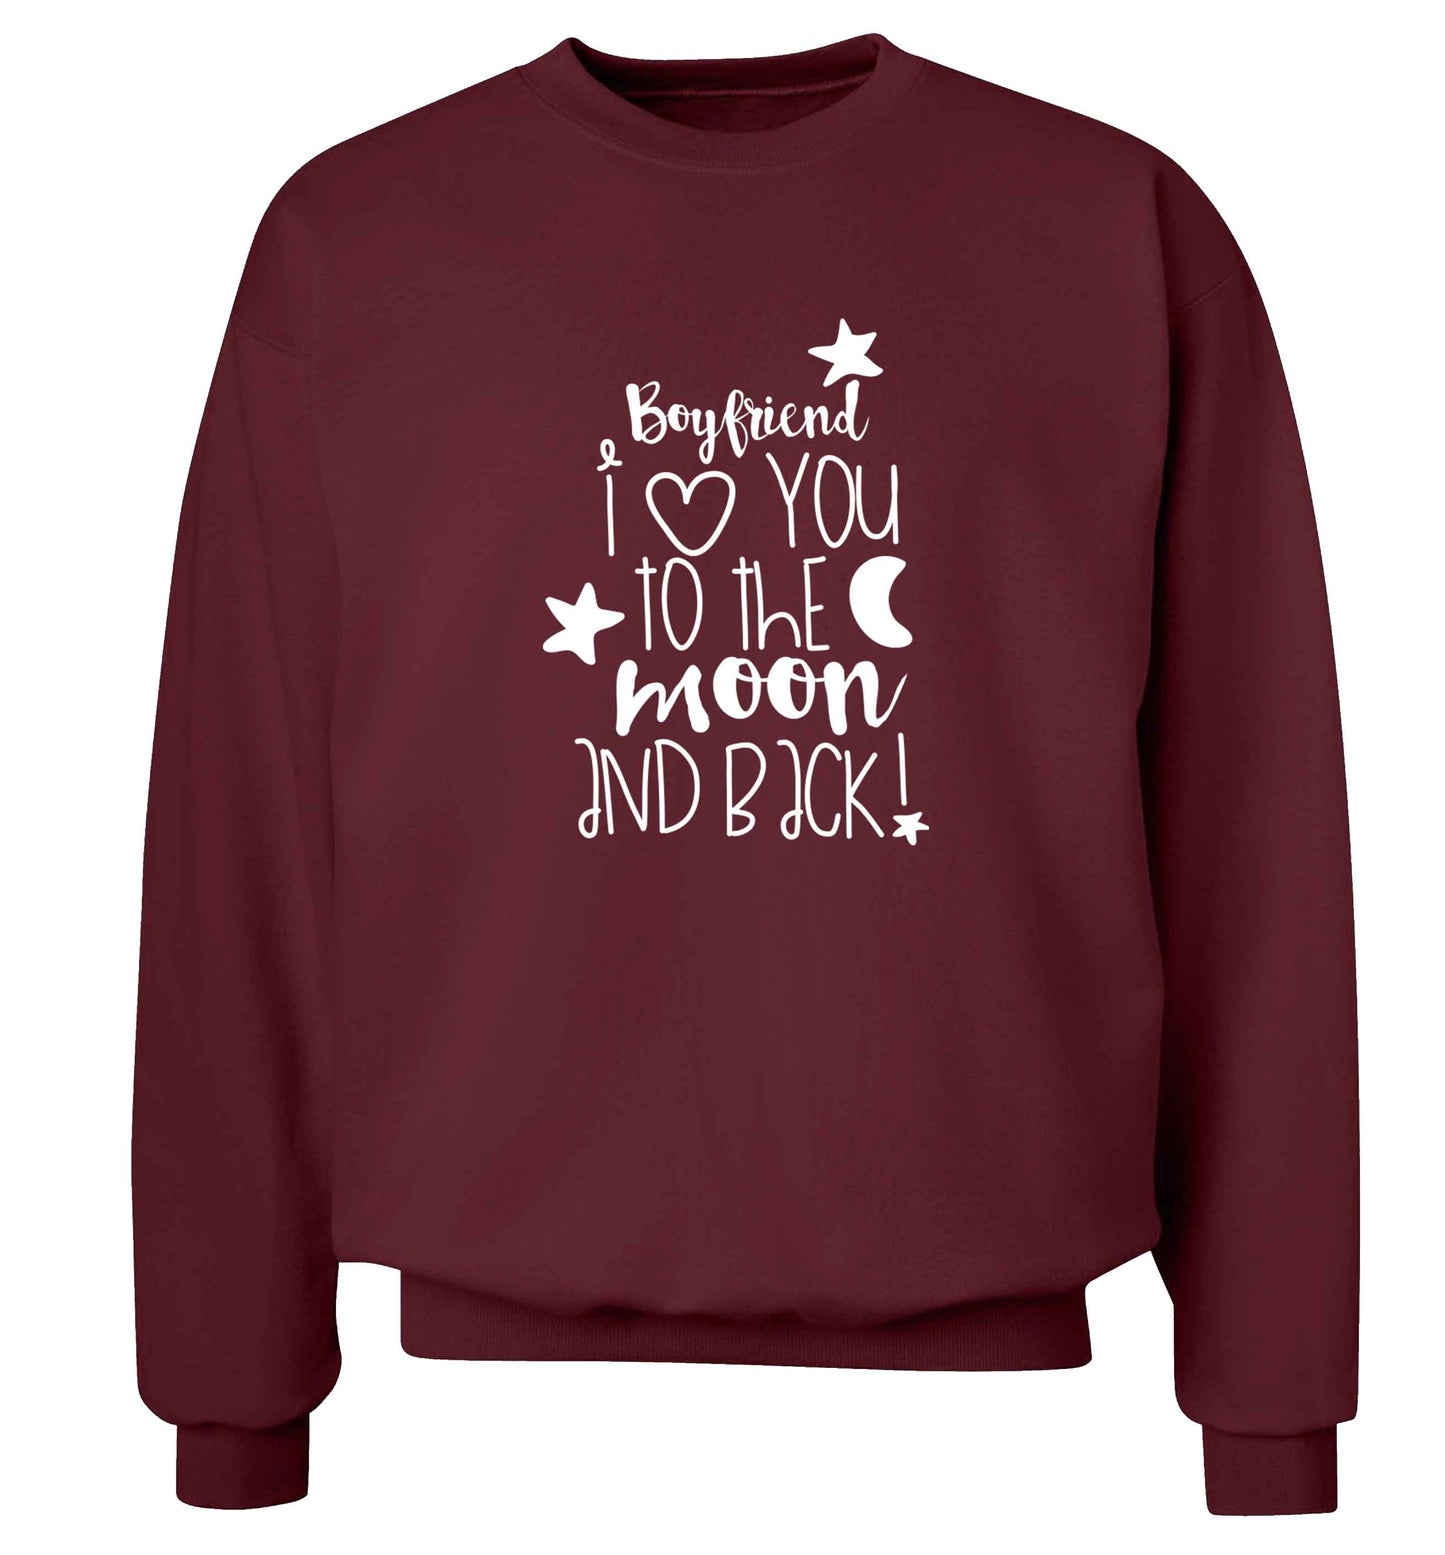 Boyfriend I love you to the moon and back adult's unisex maroon sweater 2XL